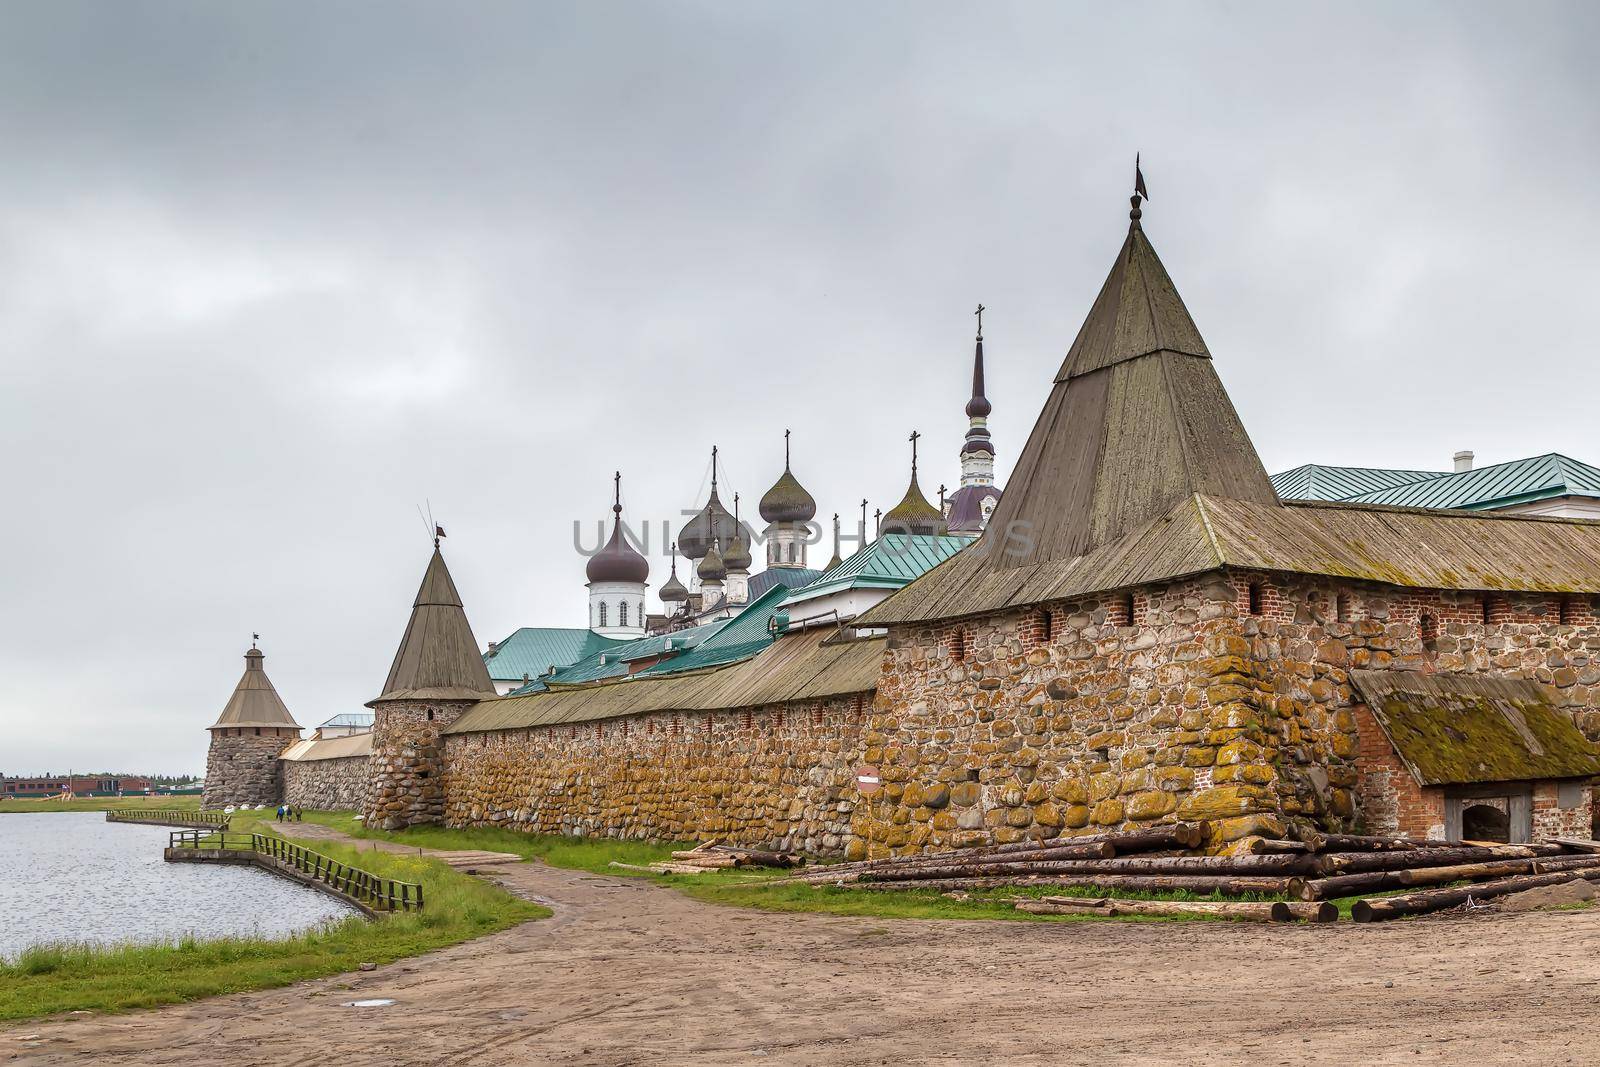 Solovetsky Monastery is a fortified monastery located on the Solovetsky Islands in the White Sea, Russia. Towers and wall